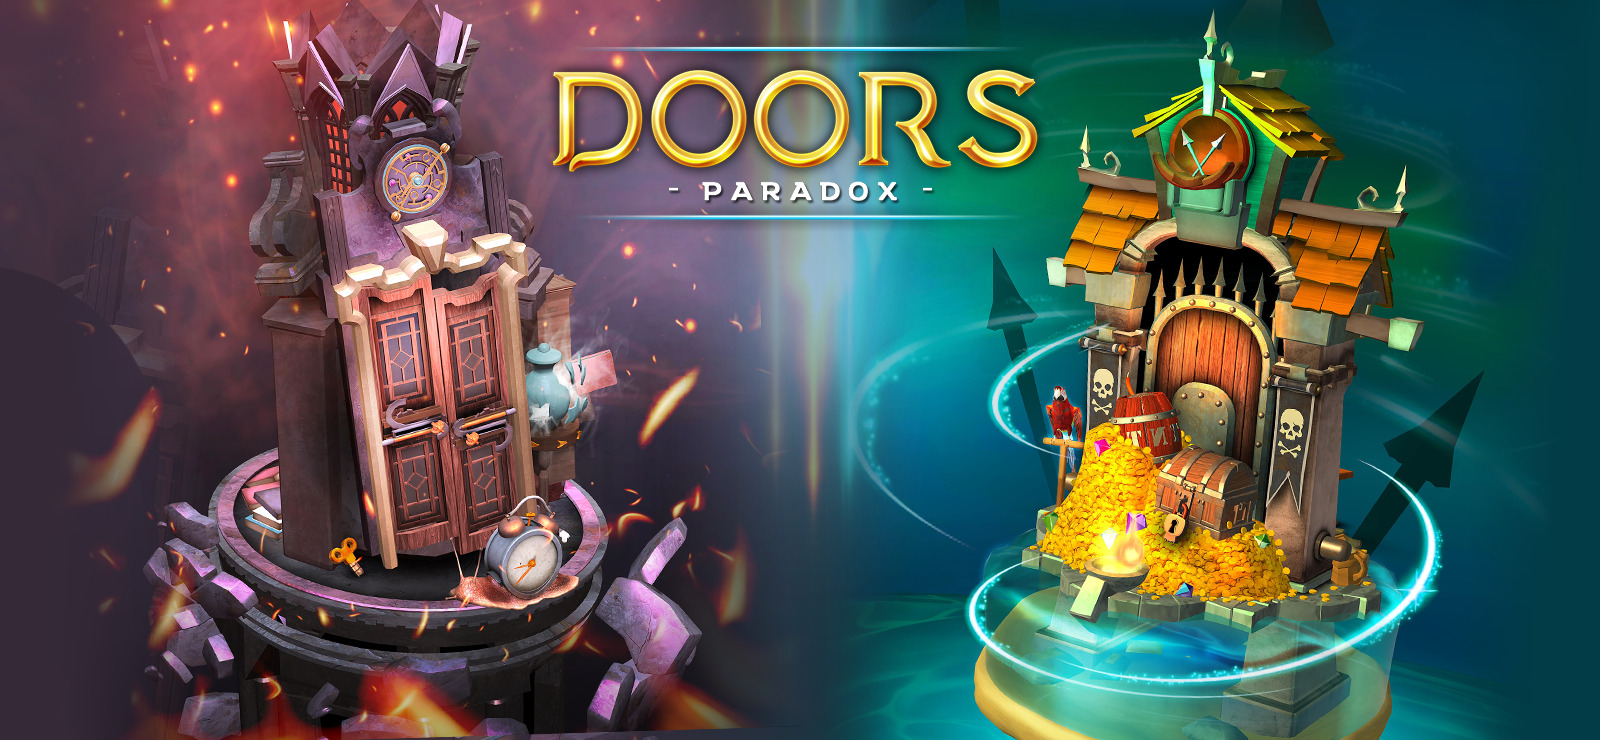 Doors: Paradox review - Fires up your imagination and puzzle